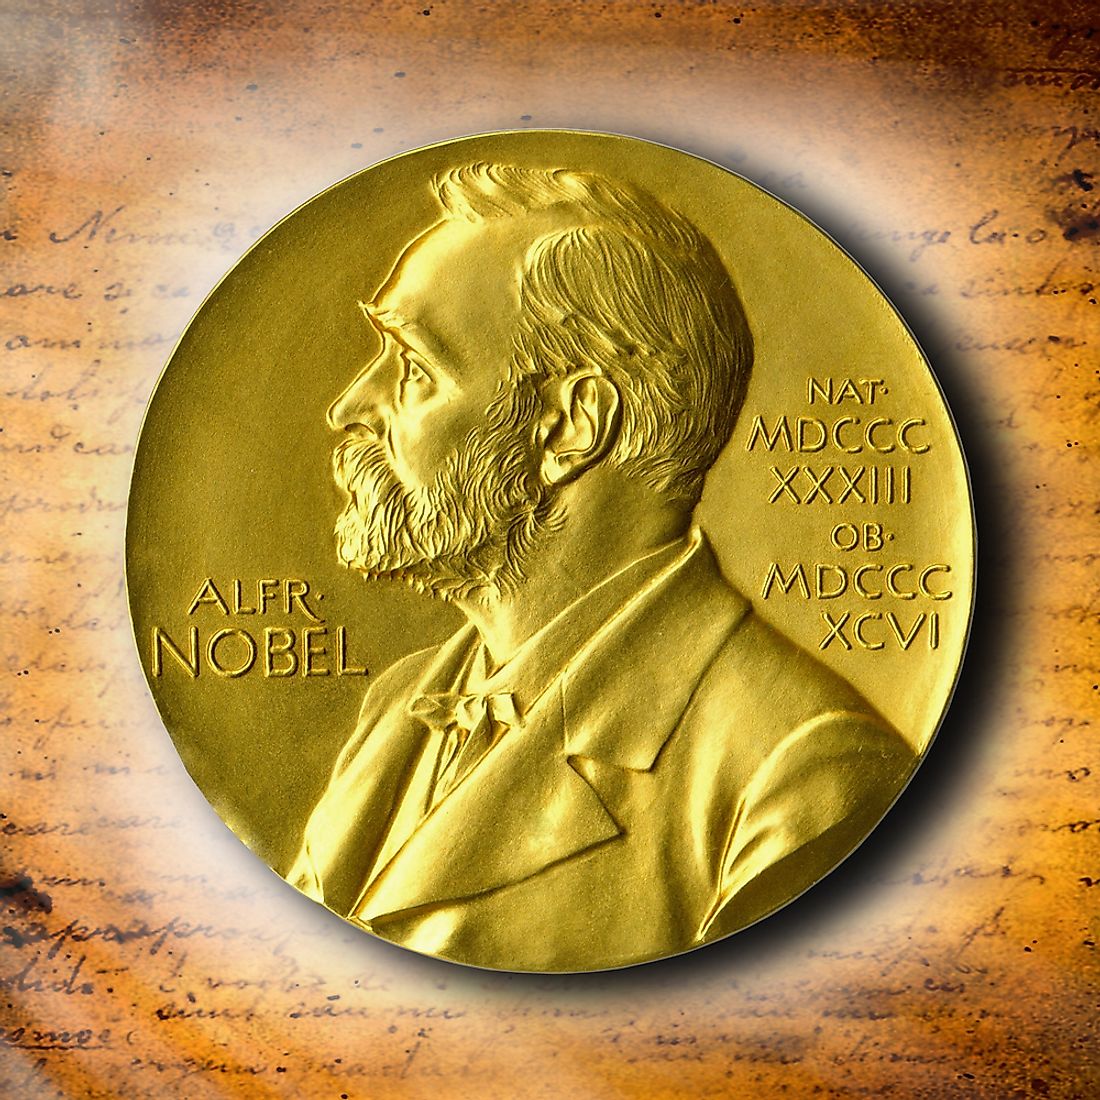 The establishment of Nobel Prize was by the will of Alfred Nobel, and usually occurs on his death anniversary, the 10th of December every year. 